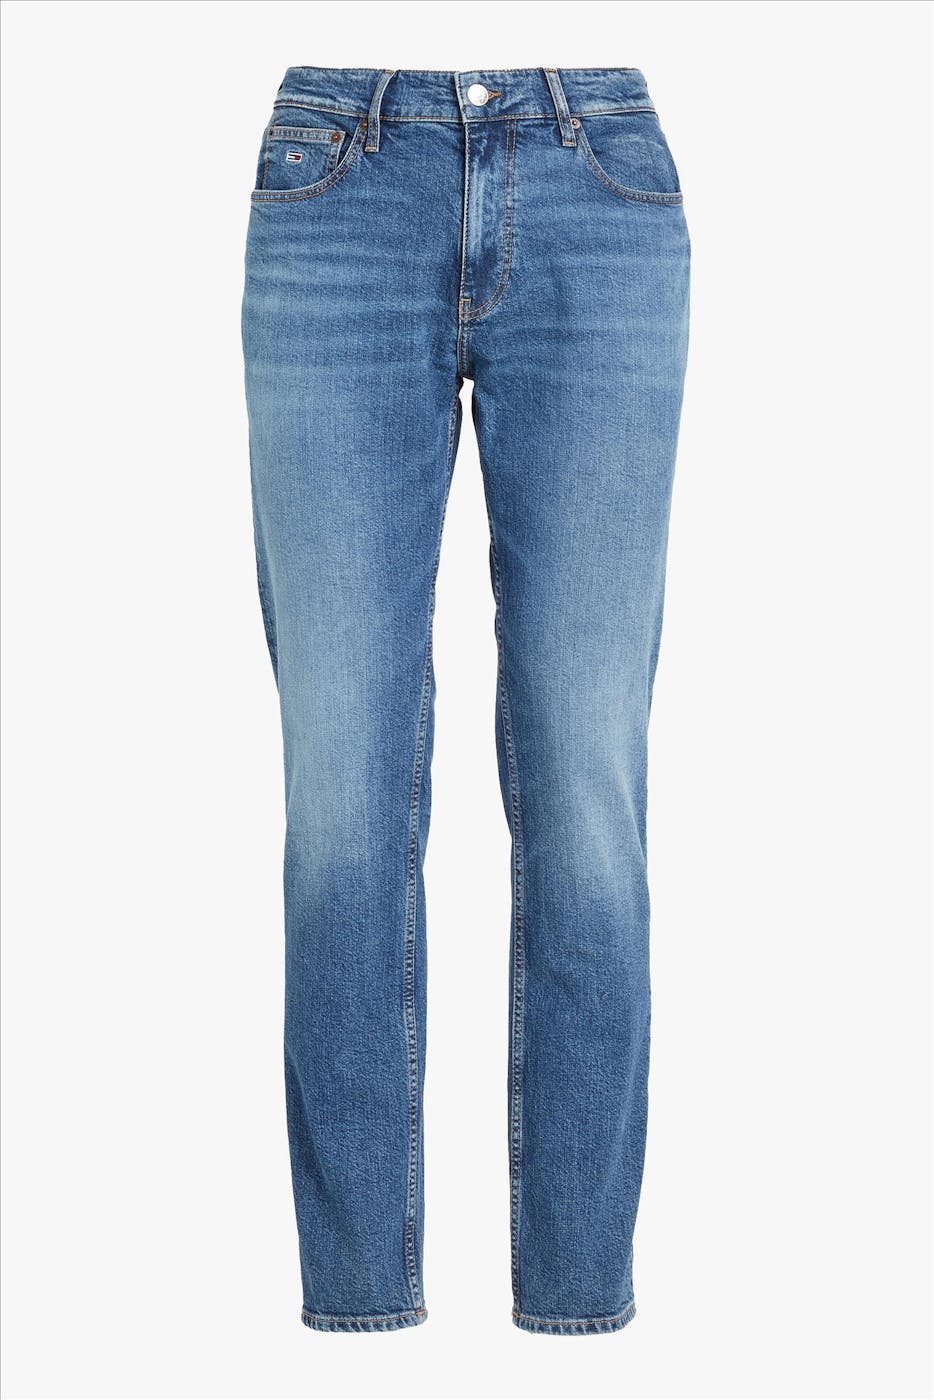 Tommy Jeans - Donkerblauwe Ryan Straight jeans